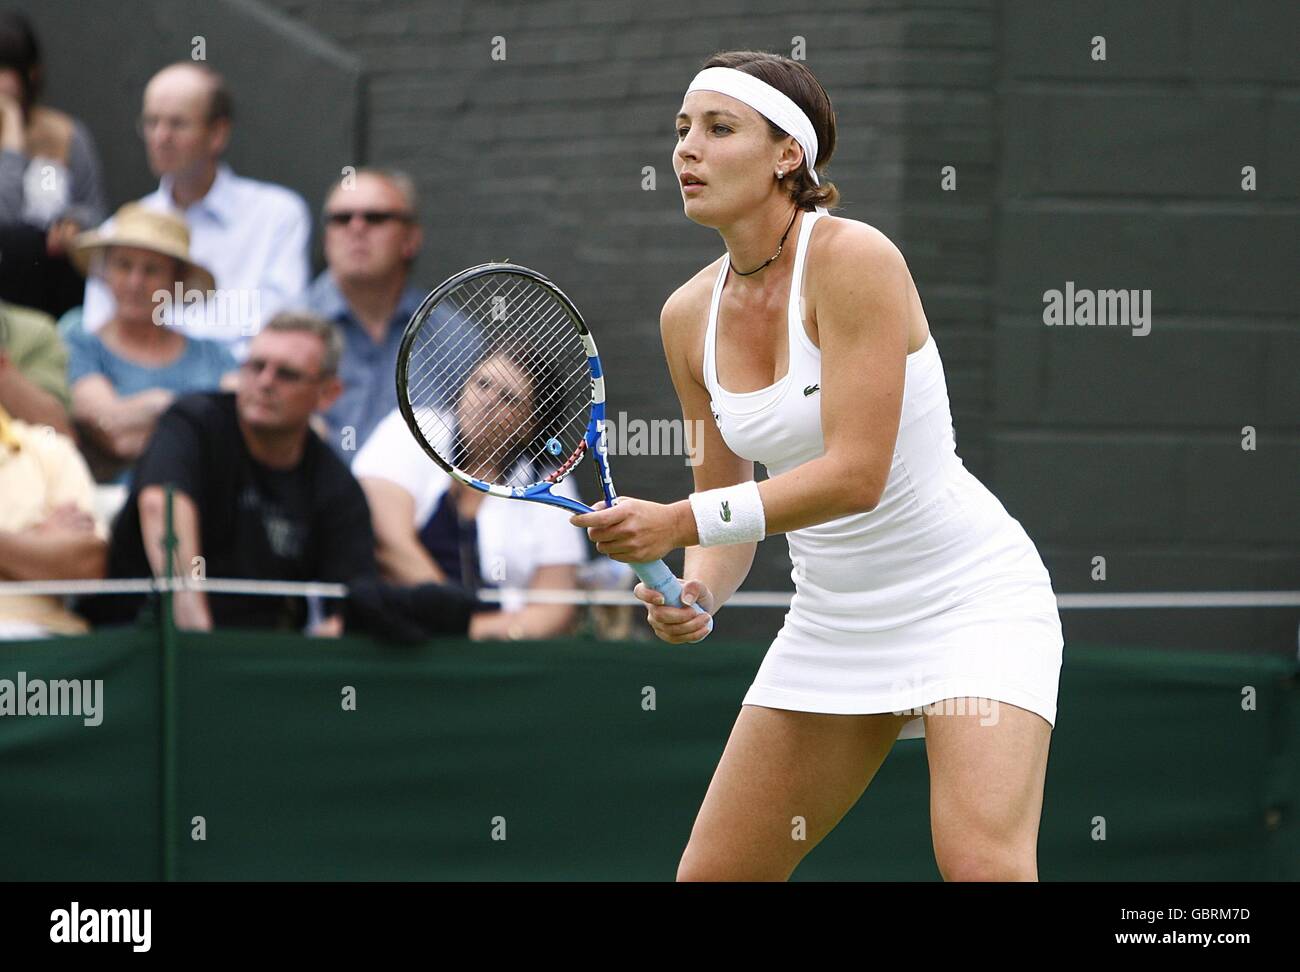 France's Severine Bremond in action against Belarus' Victoria Azarenka during the Wimbledon Championships 2009 at the All England Tennis Club Stock Photo